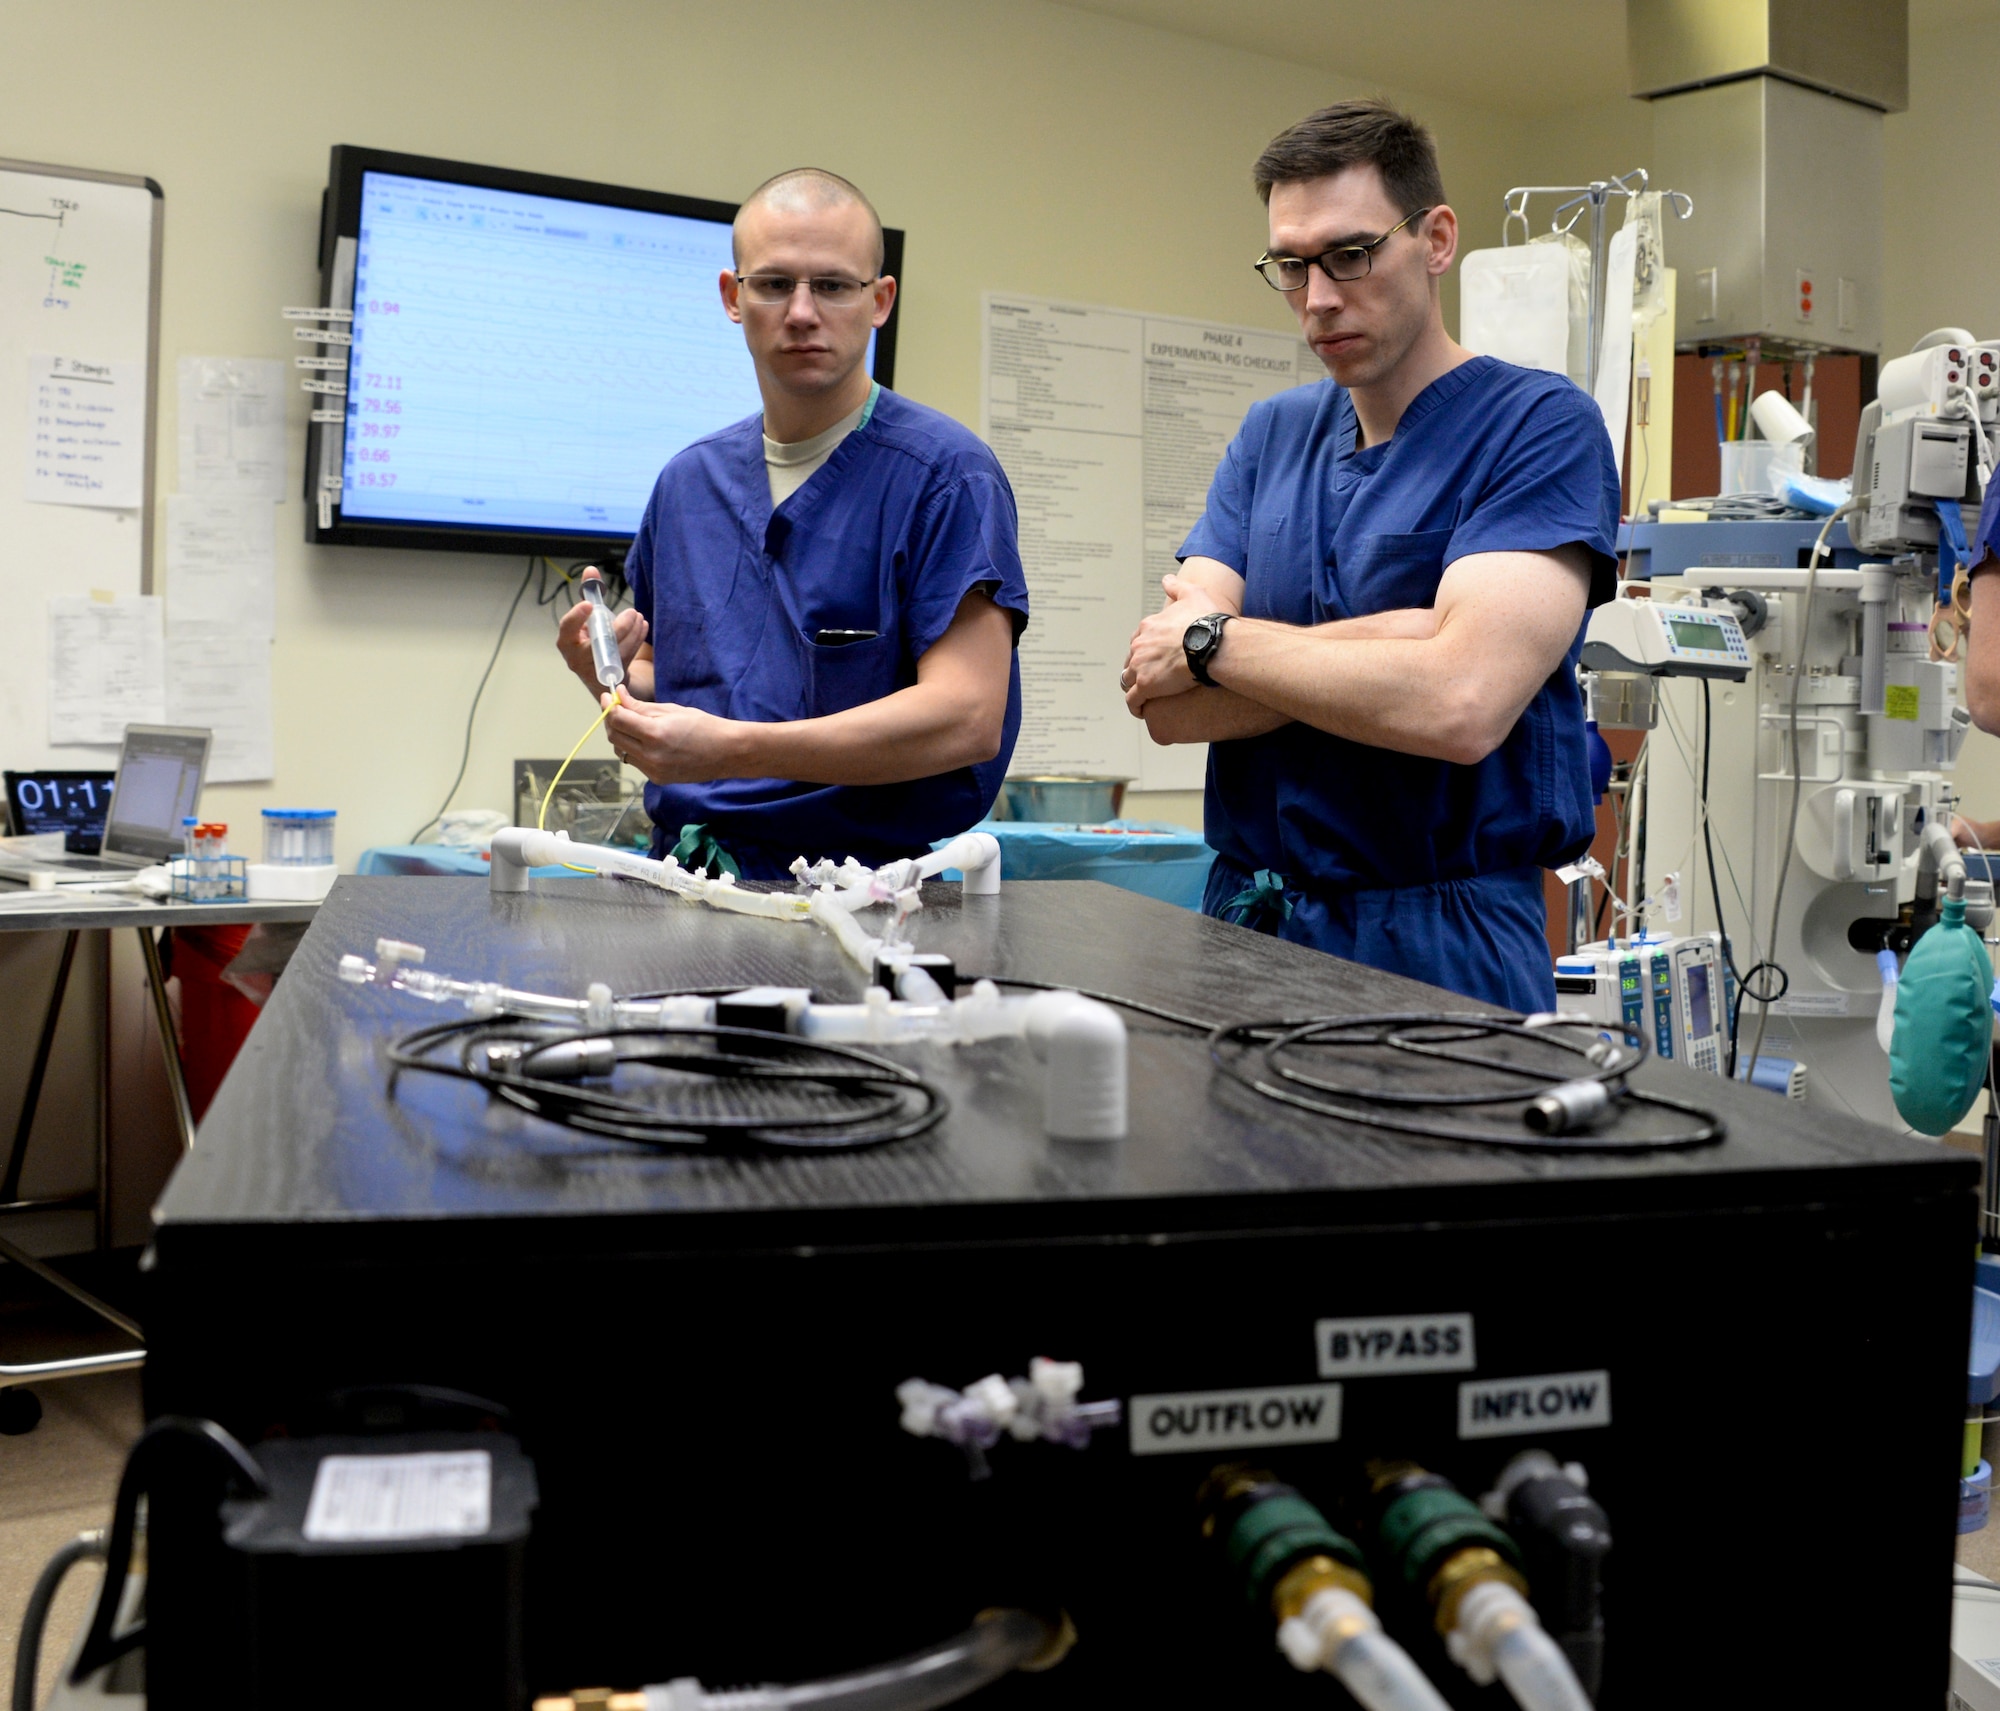 Maj. Timothy Williams, left, and Maj. Lucas Neff, right, perform bench top testing of balloon catheters March 14 at Travis Air Force Base, Calif., using a custom-made blood flow simulator. The CIF, located at David Grant USAF Medical Center, is the research facility where the REBOA catheter came to fruition. (U.S. Air Force photo by Senior Airman Amber Carter)
